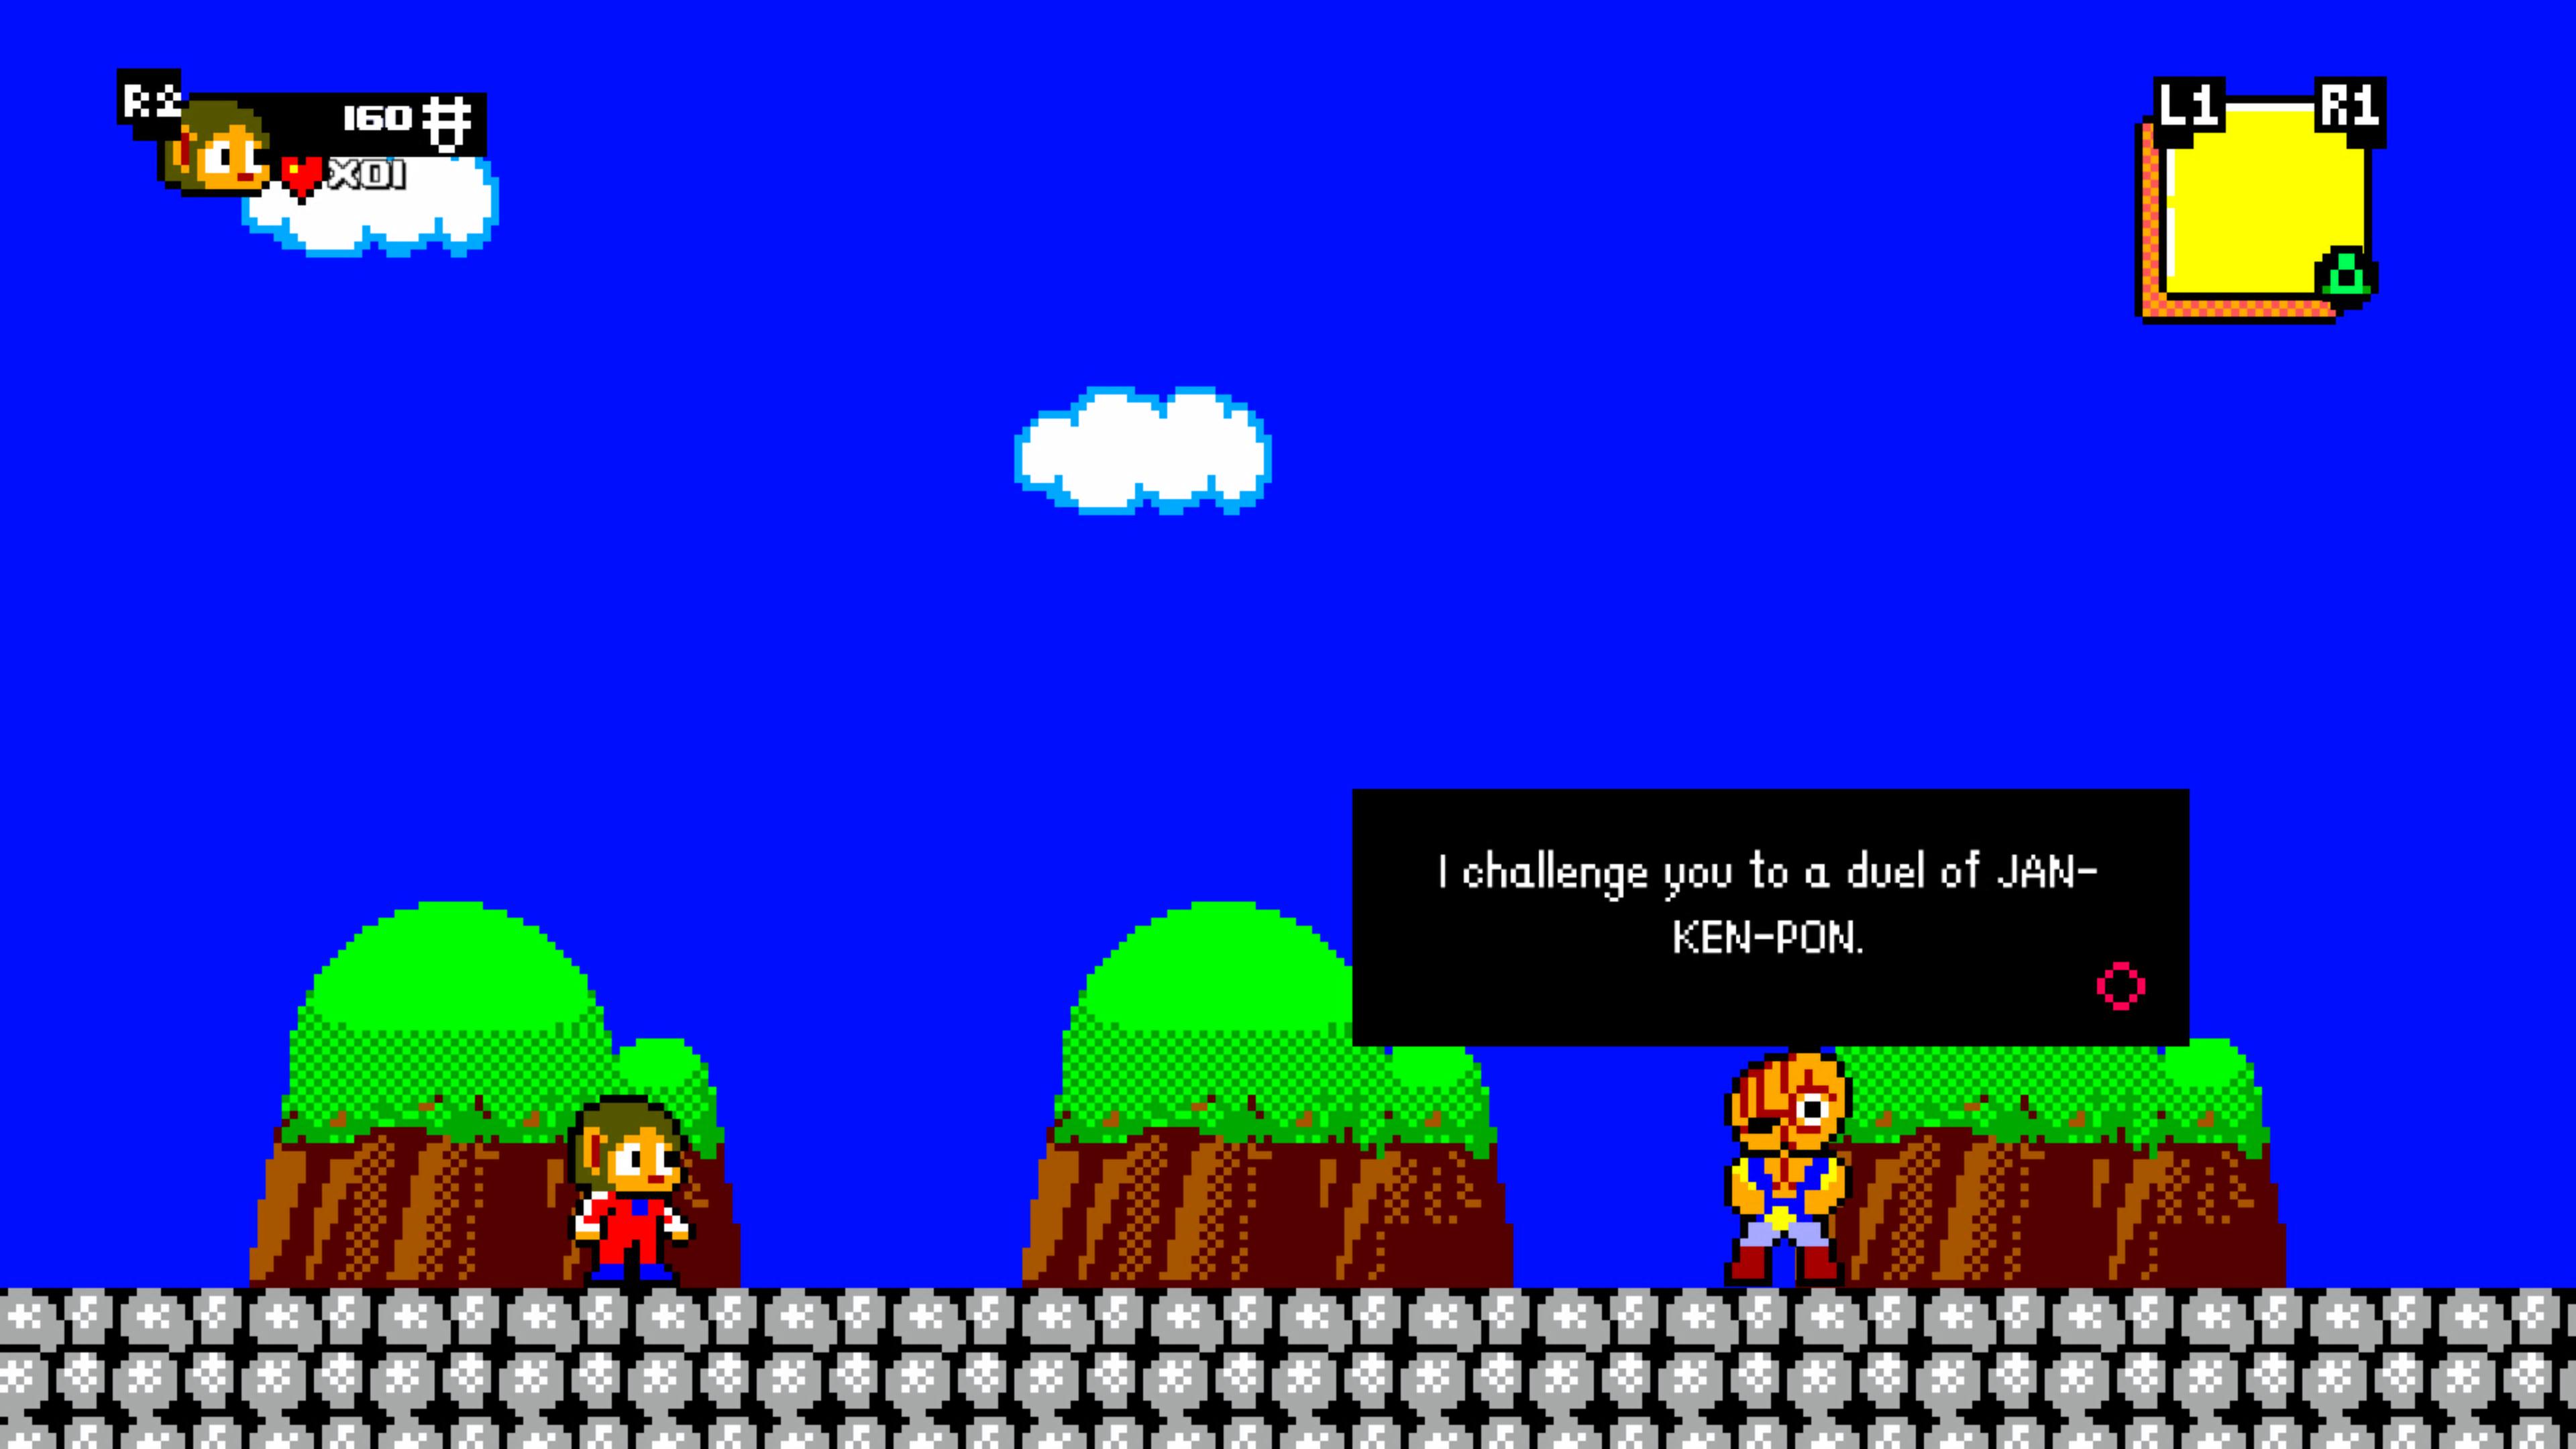 Alex Kidd in Miracle World DX